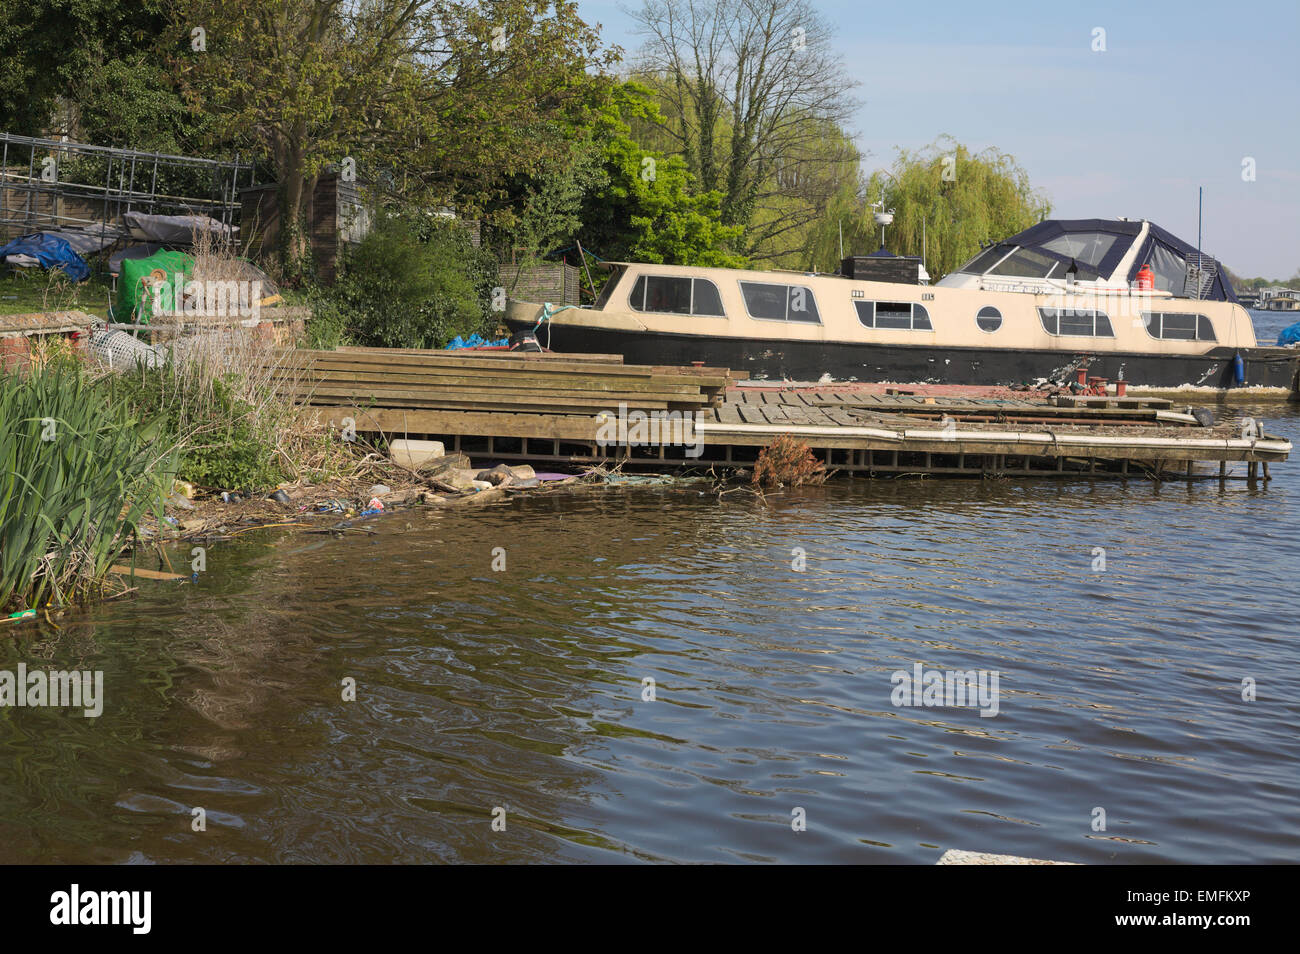 Motor boat cruiser at the shoreline River Thames with floating rubbish in the water Stock Photo